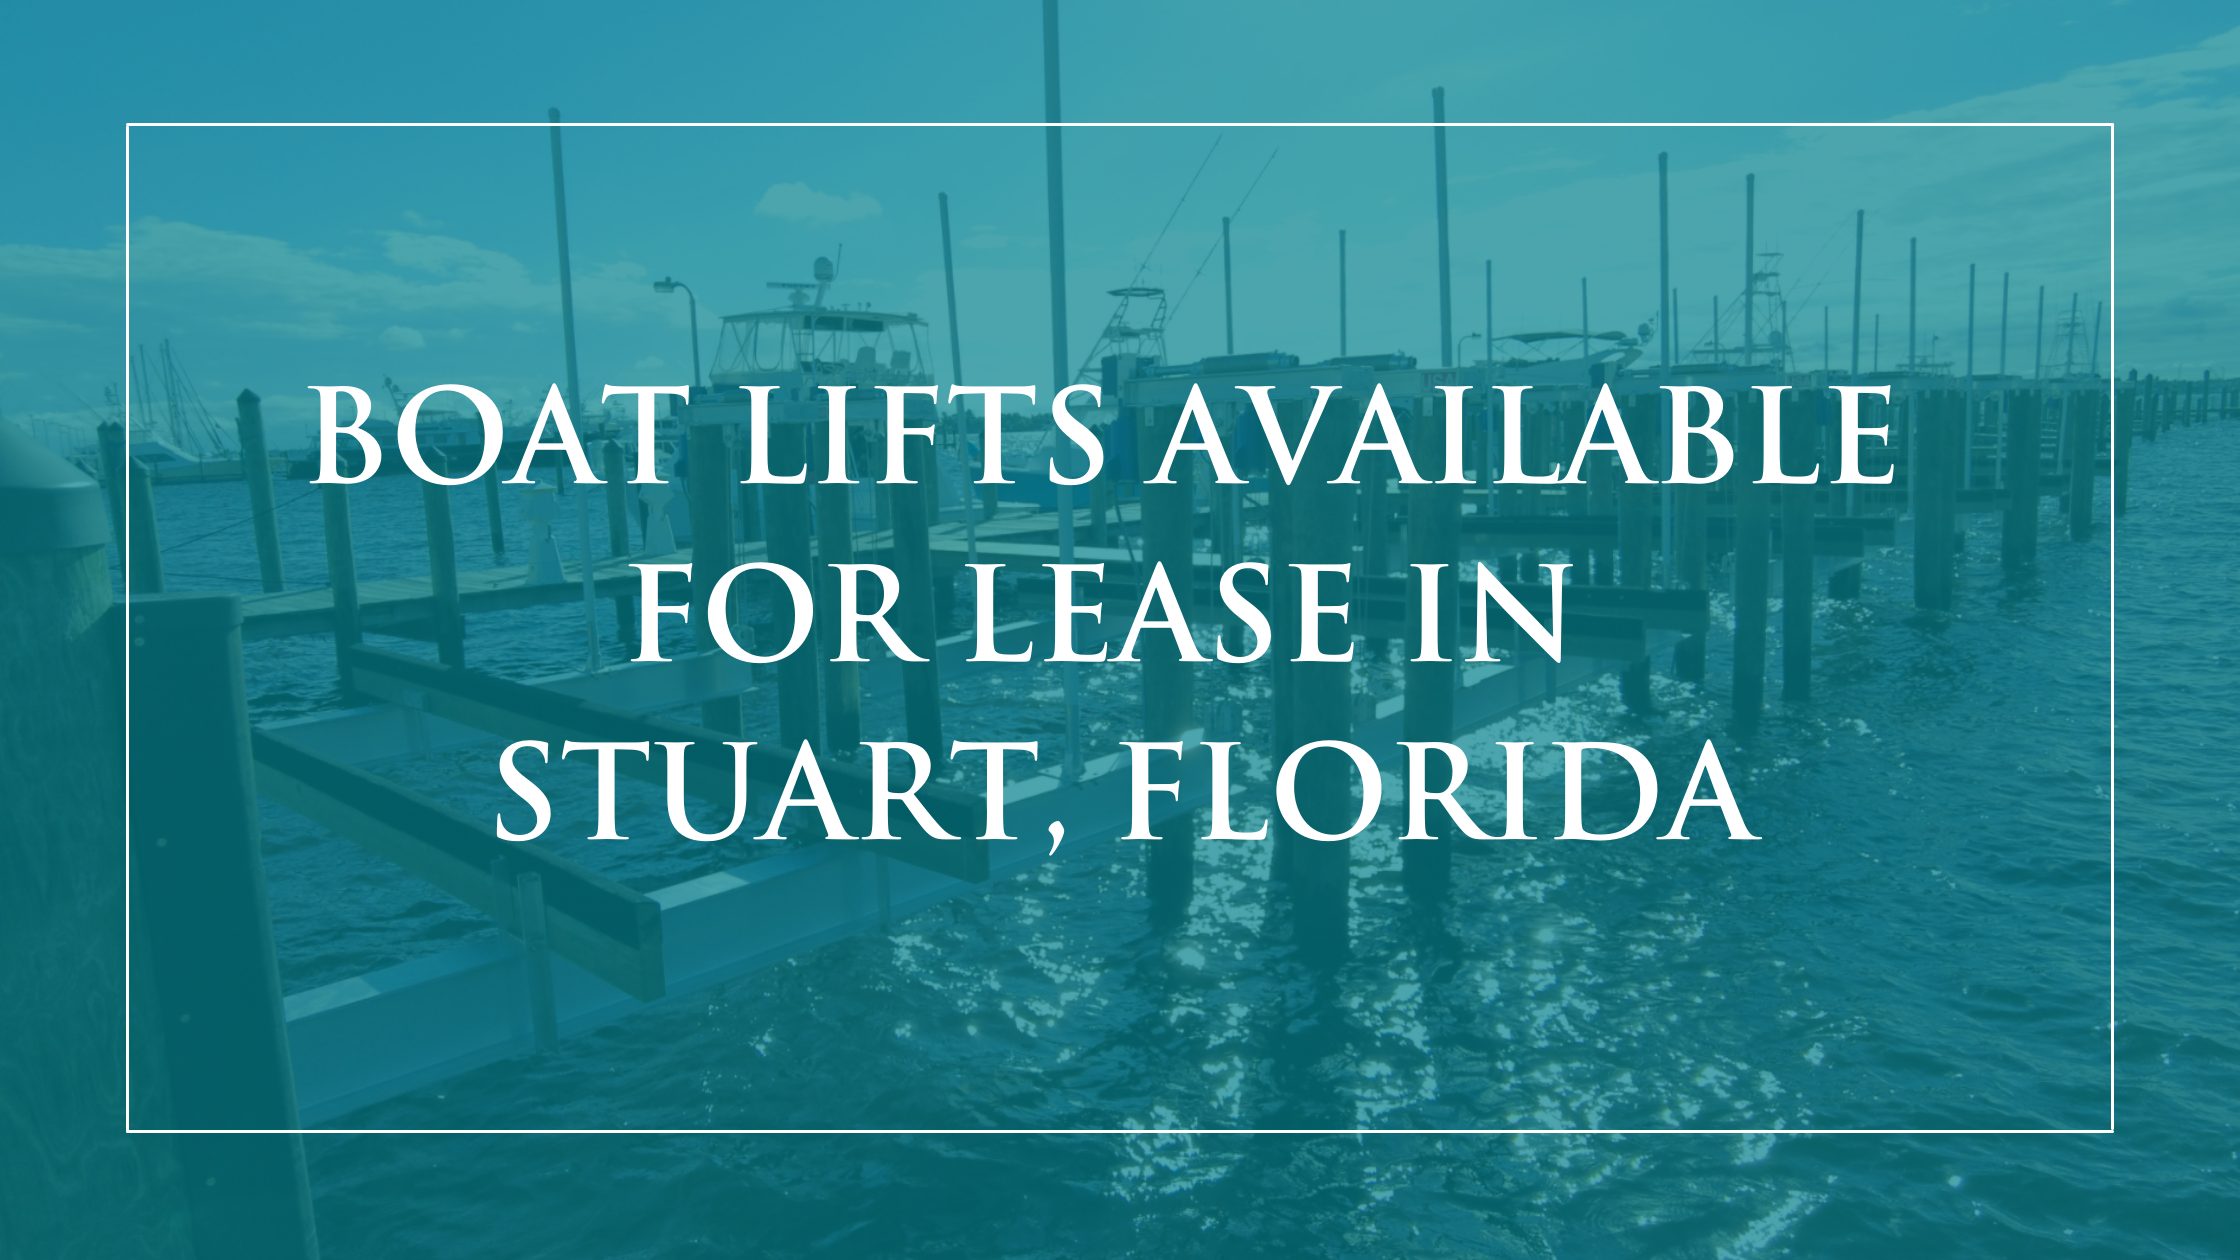 Boat Lifts Available for Lease in Stuart, Florida